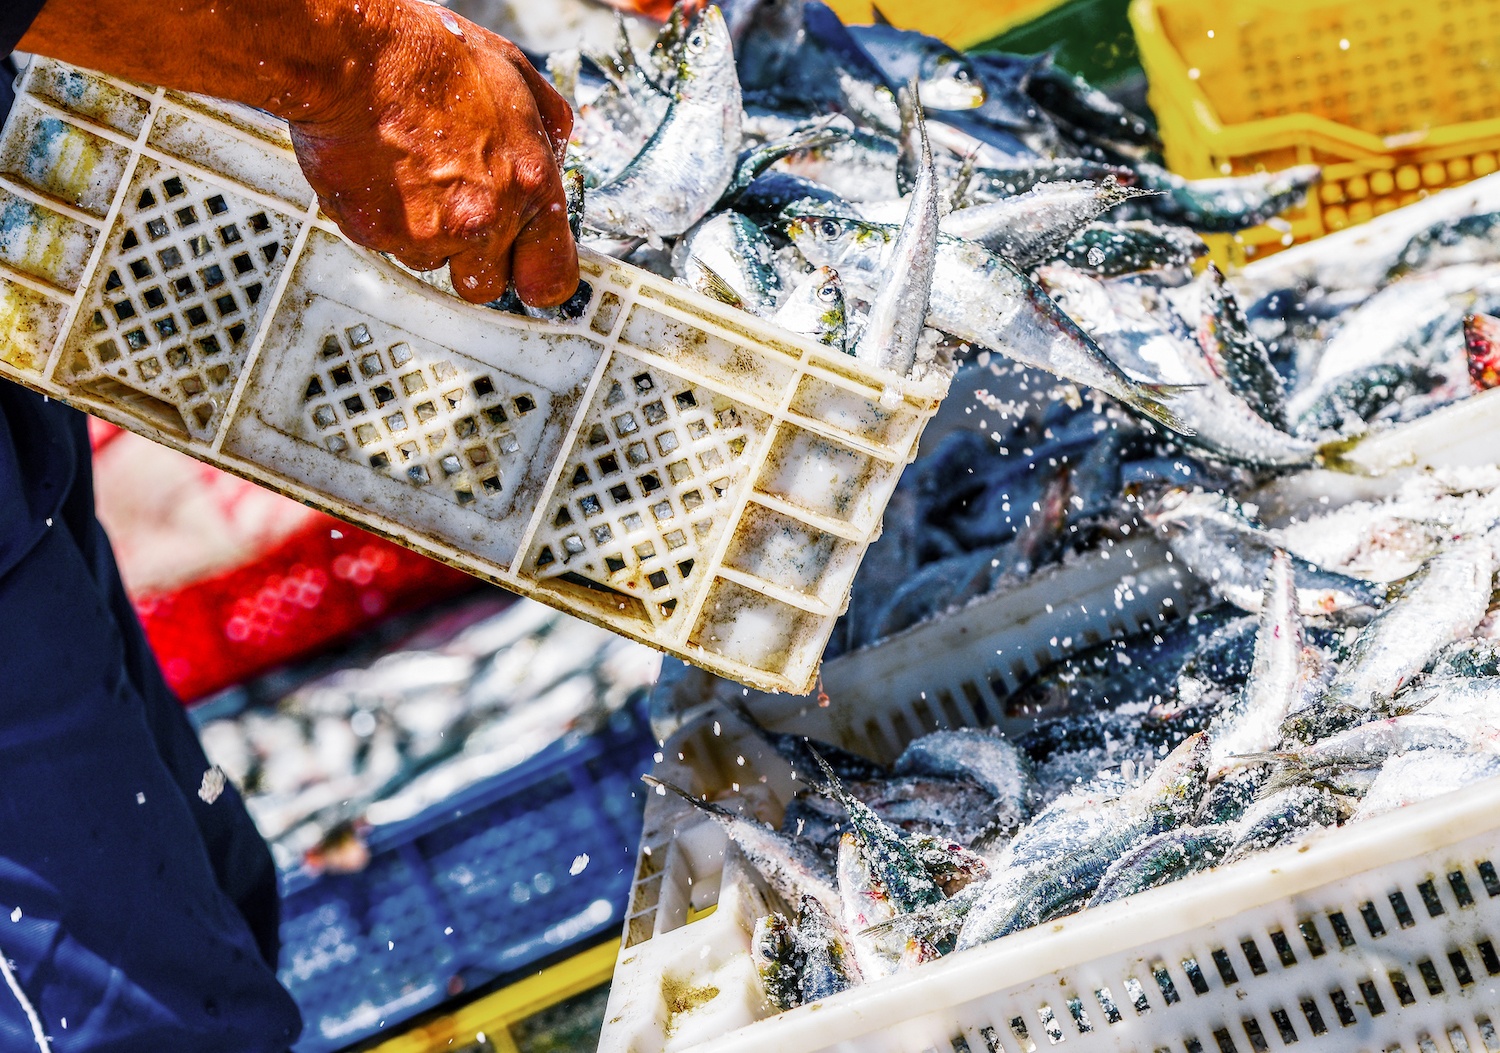 Two fisherman arranging white containers full of fish on top of each other while coating them with salt, June 2021.